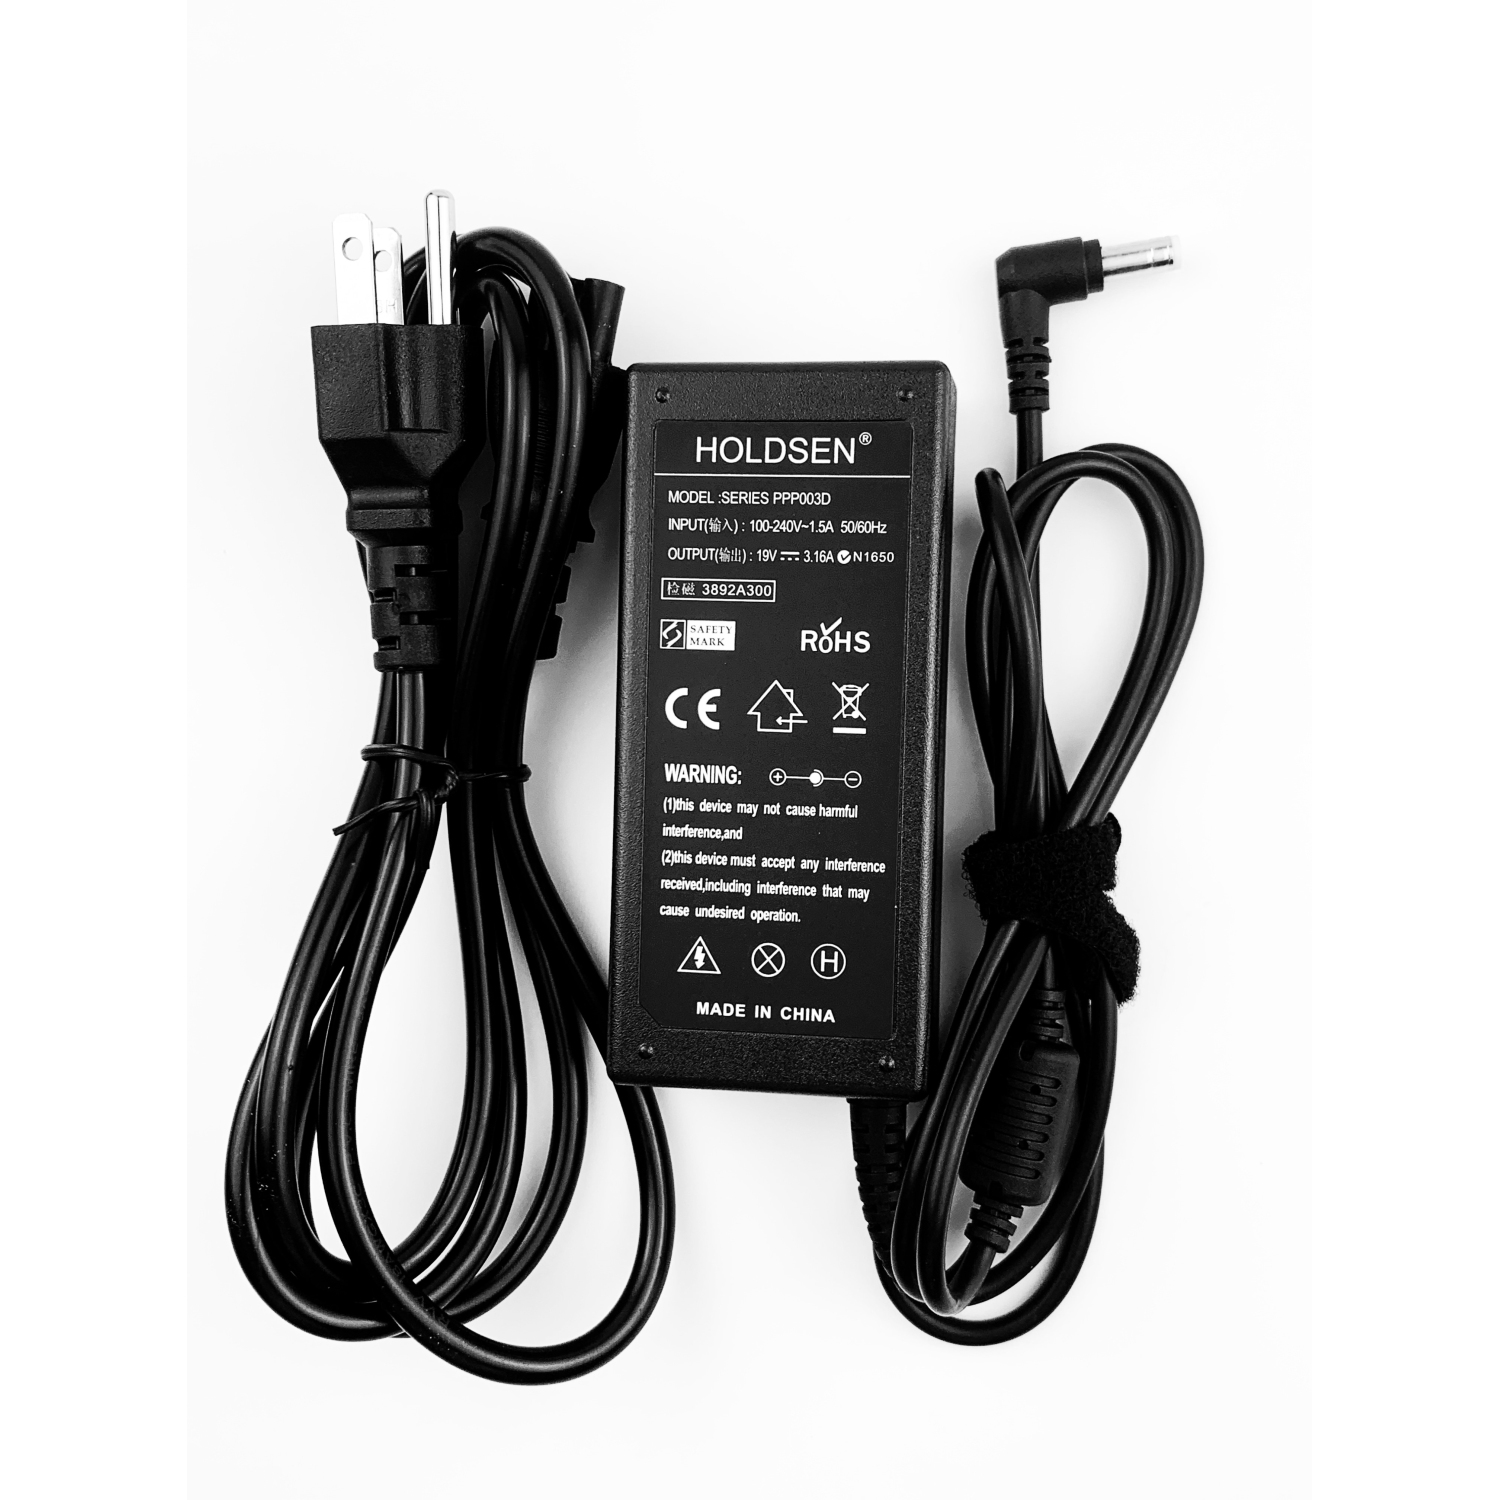 19V 2.37A 3.16A 60W AC adapter power cord for HP Pavilion 22fi 25 25er 25vx LCD monitors ONLY